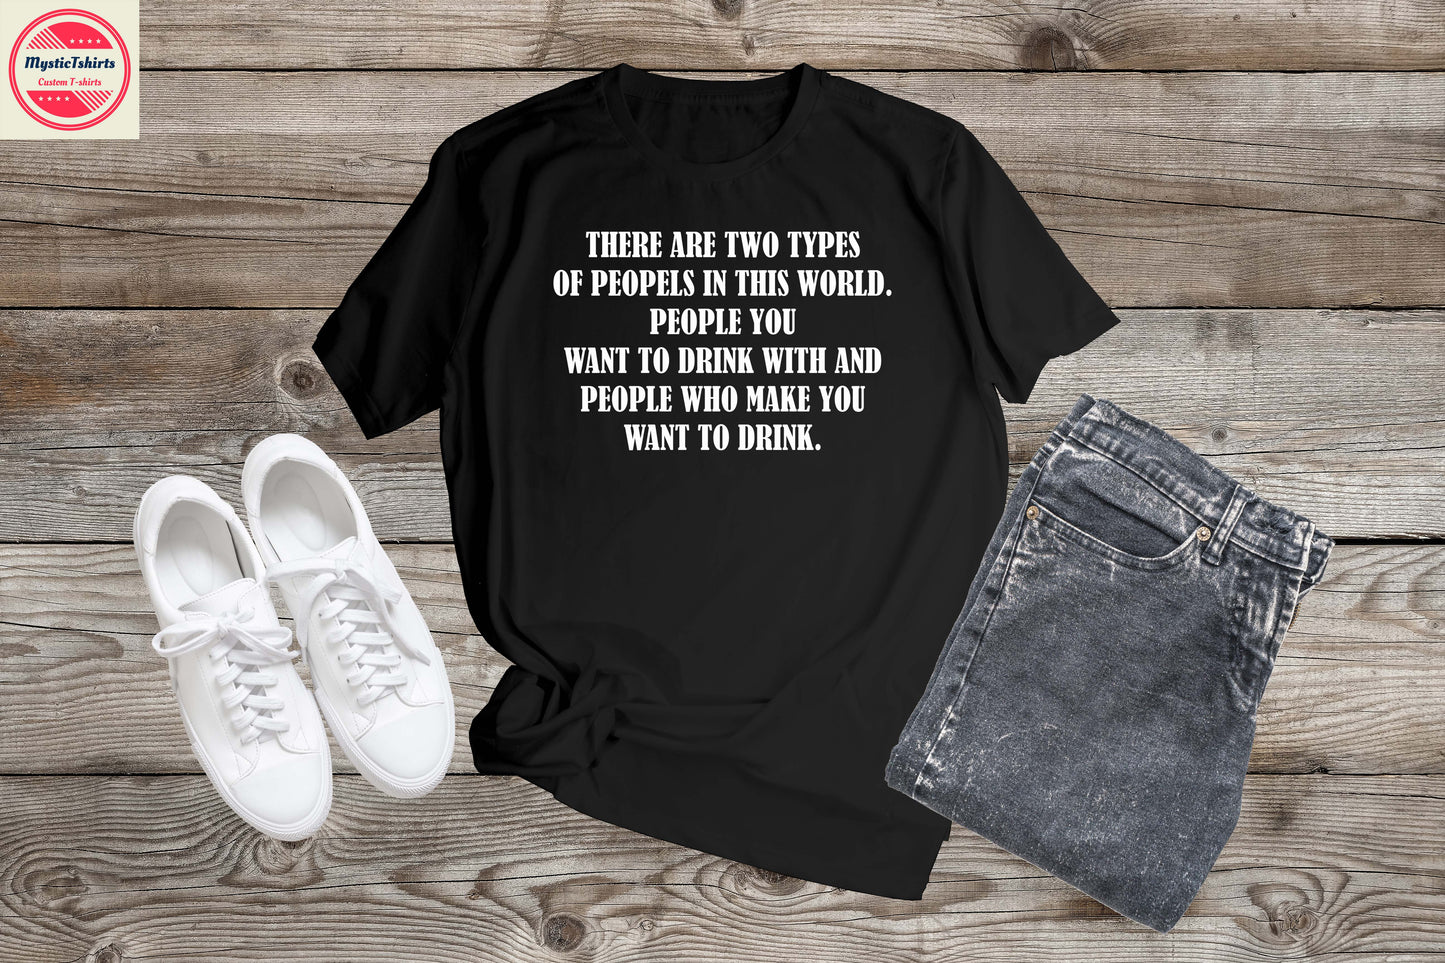 468. TWO TYPES OF PEOPLE, Custom Made Shirt, Personalized T-Shirt, Custom Text, Make Your Own Shirt, Custom Tee